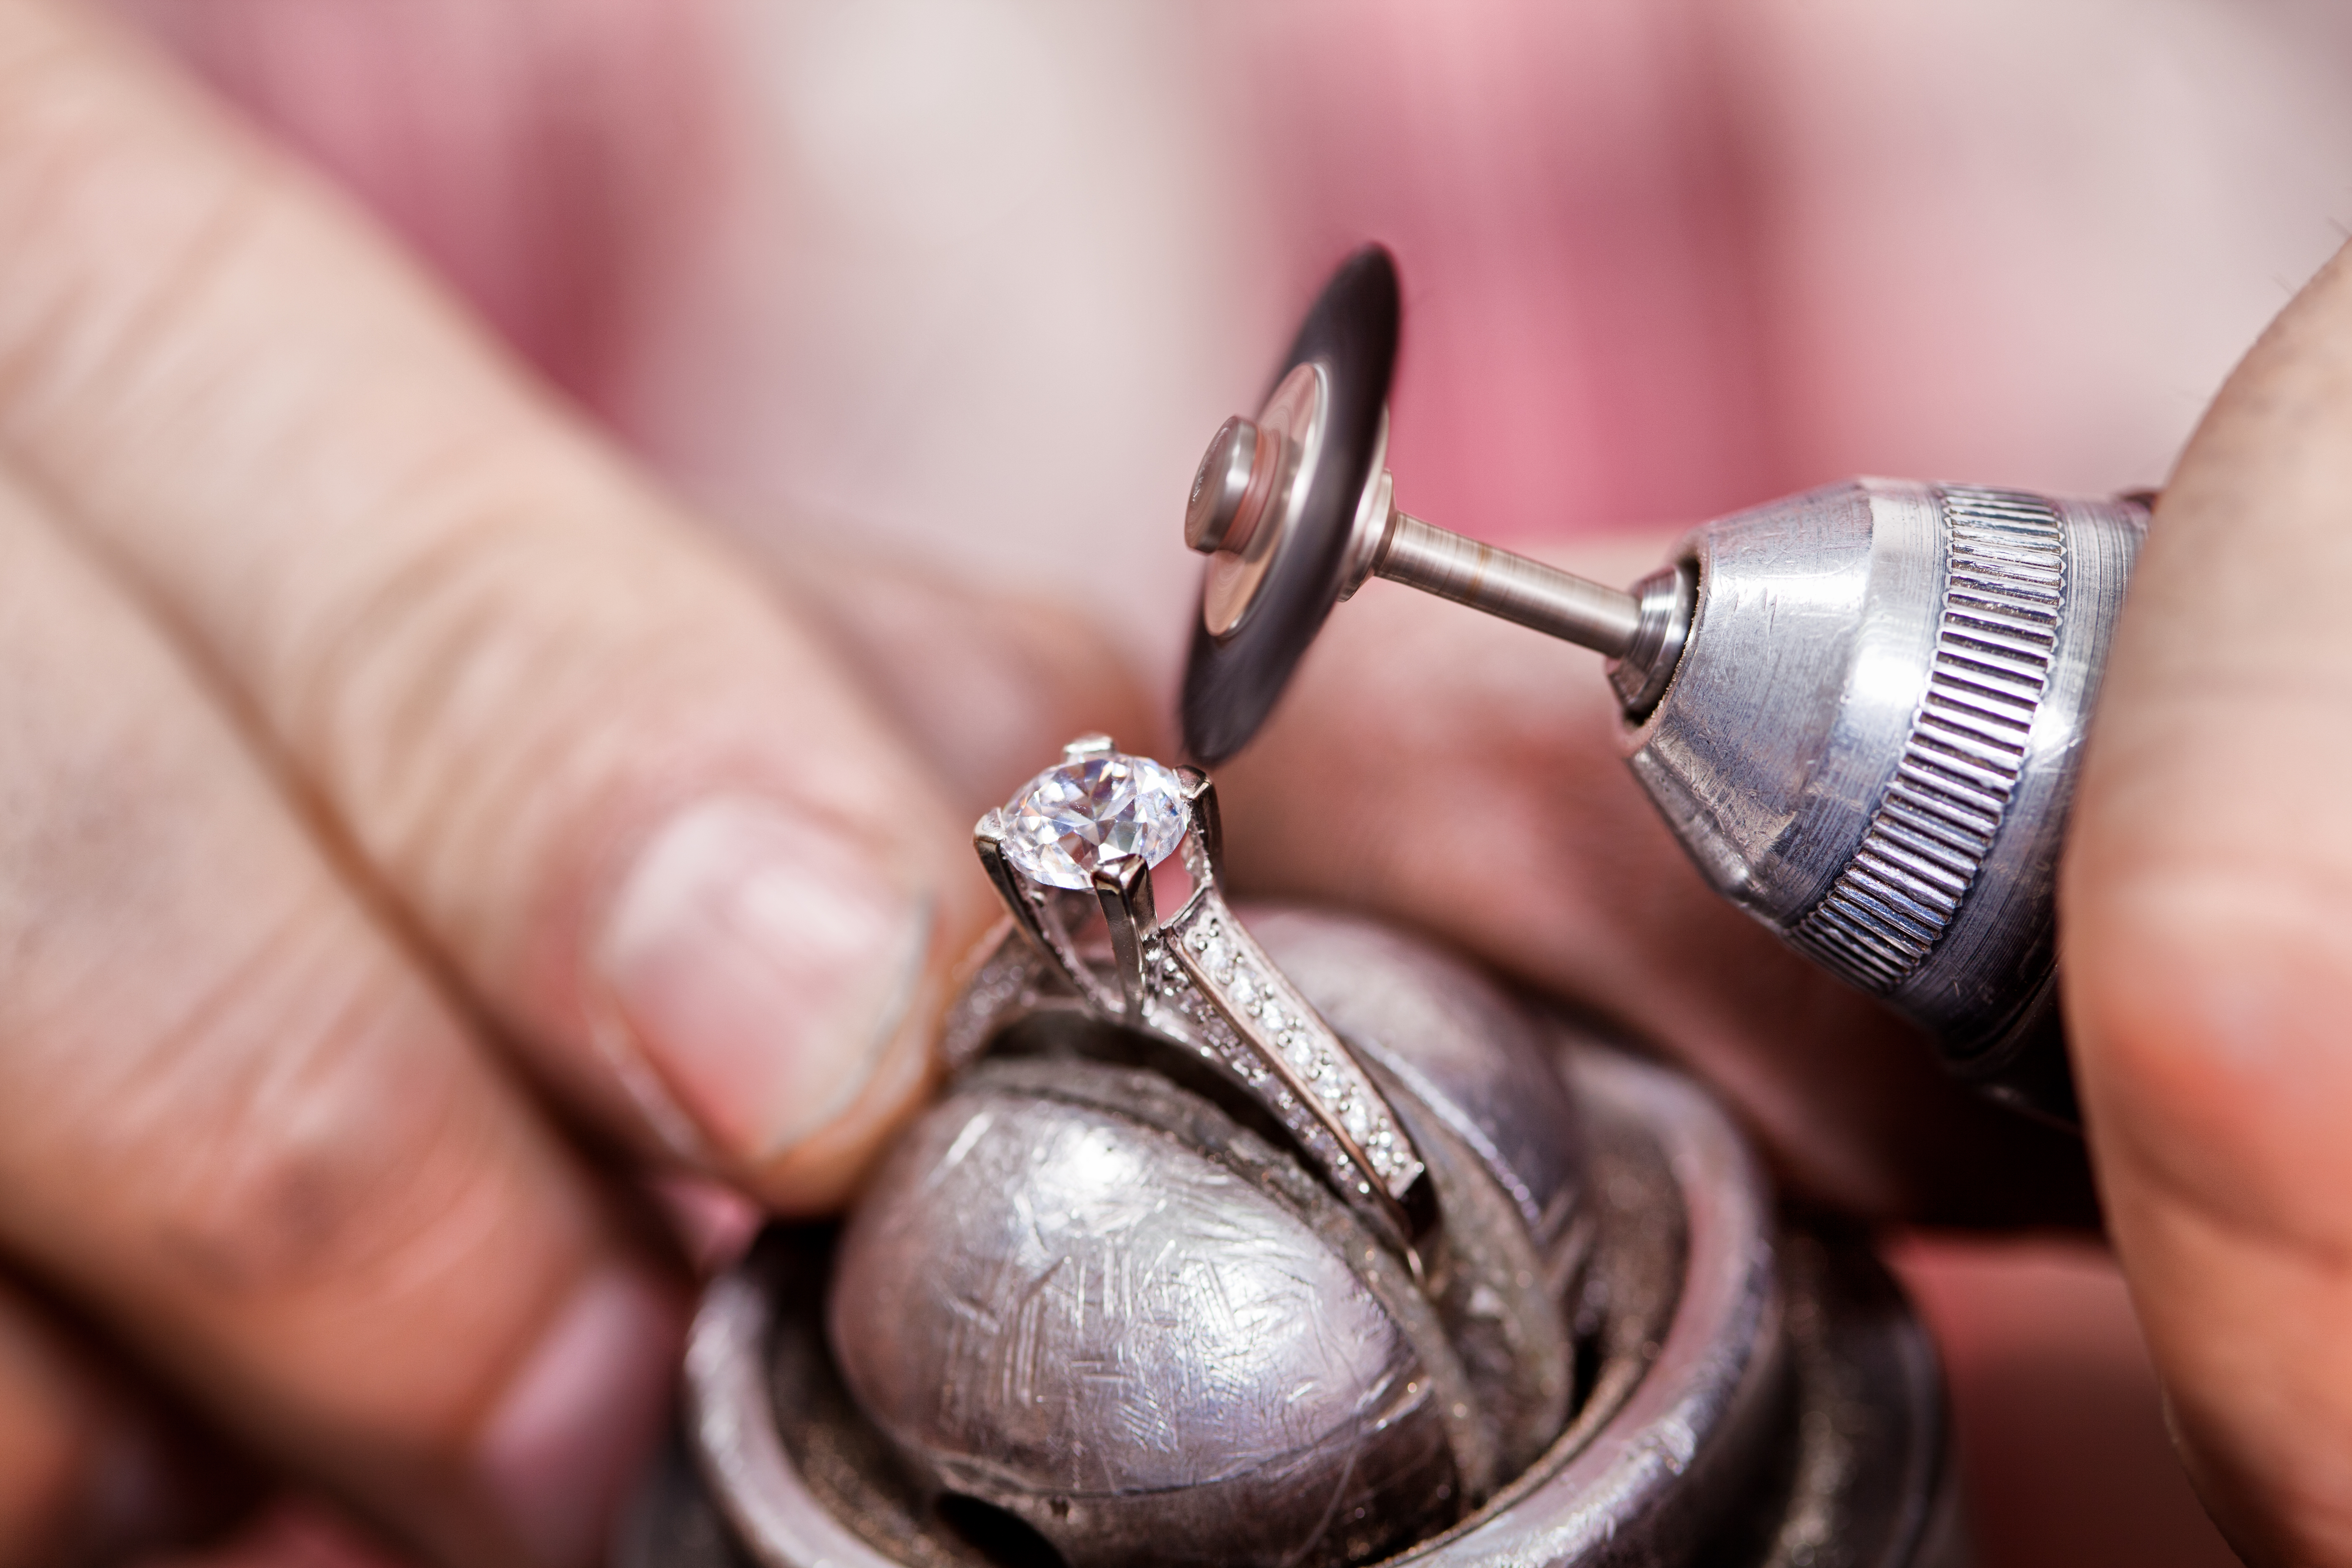 A ring being buffed | Source: Getty Images